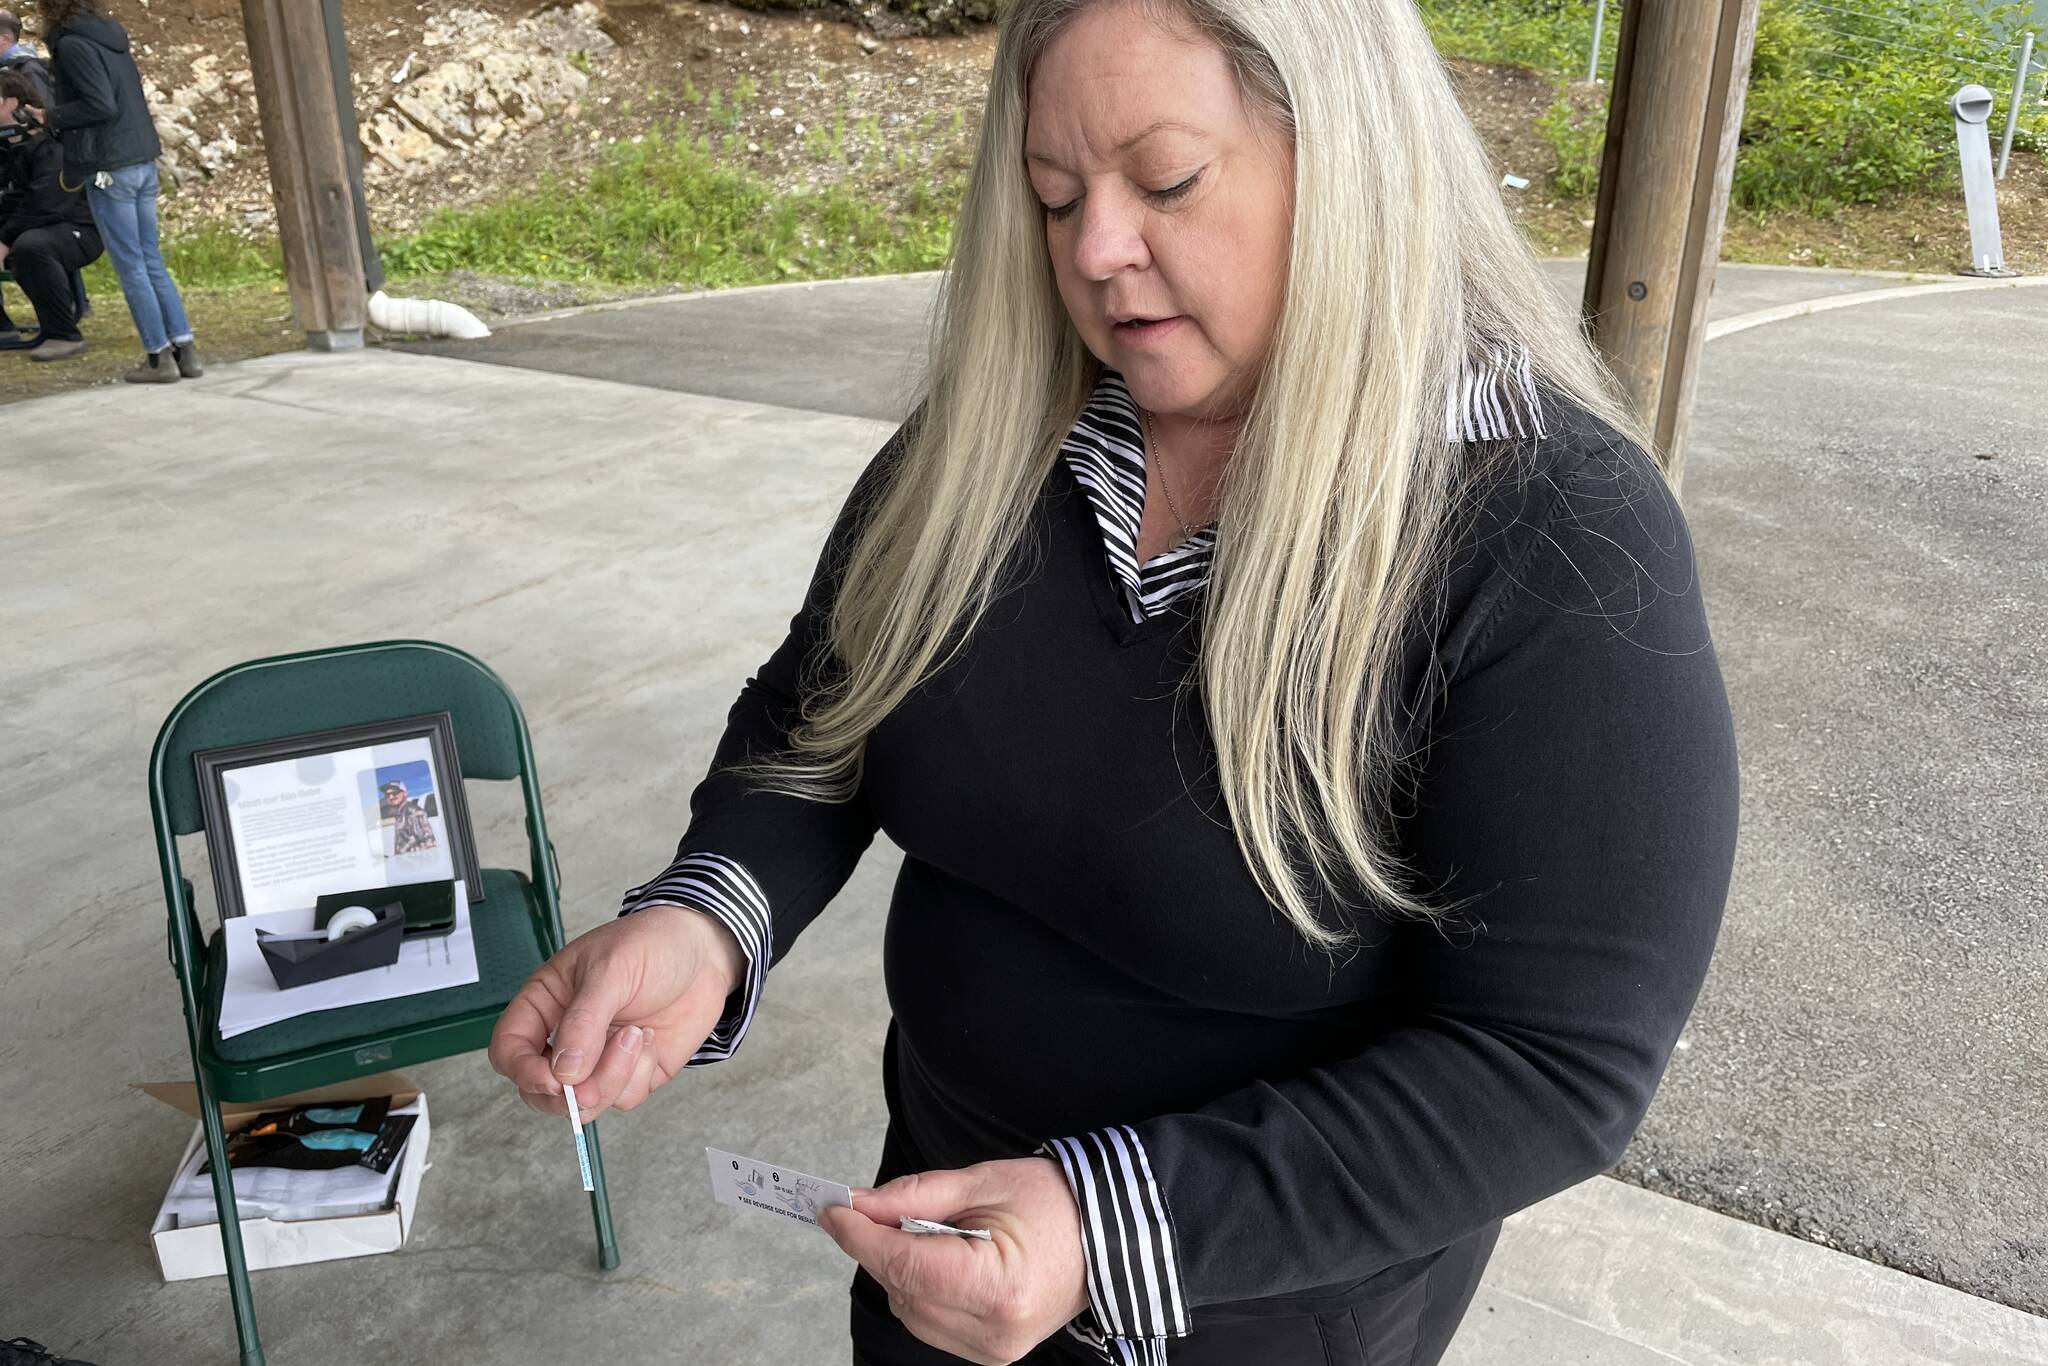 Denise Ewing, mother of Gabe Johnston, whose death galvanized the creation of Project Gabe, demonstrates a fentanyl test strip on June 10, 2022. Volunteers assembled 150 opioid overdose kits for the project. (Michael S. Lockett / Juneau Empire)